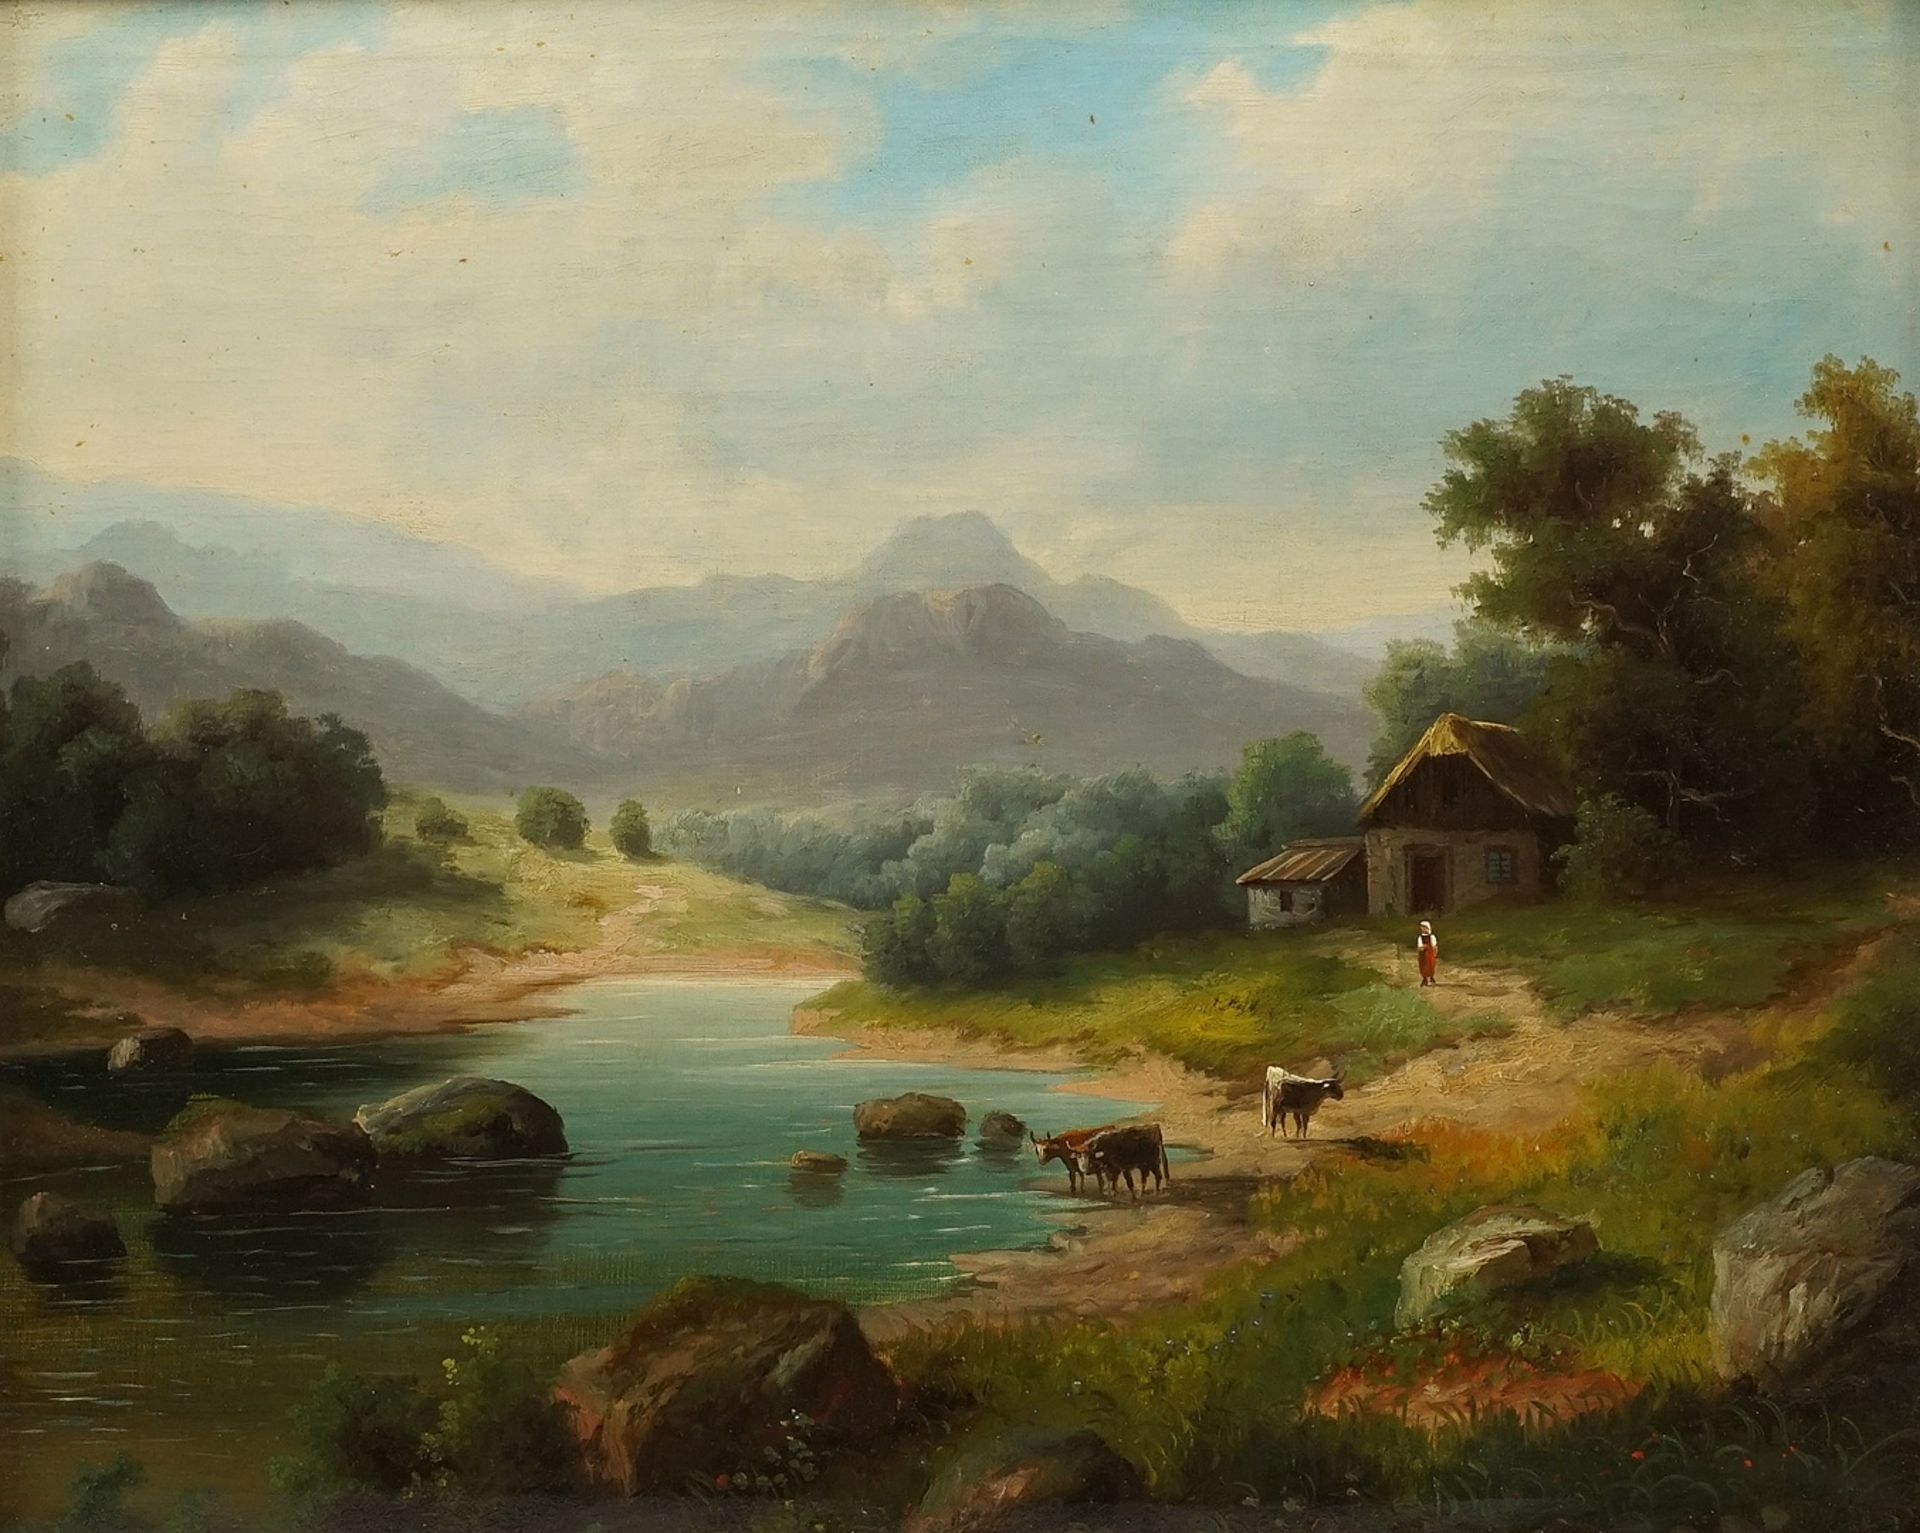 Unknown romantic, Peasant woman with cattle by the river - Image 2 of 3